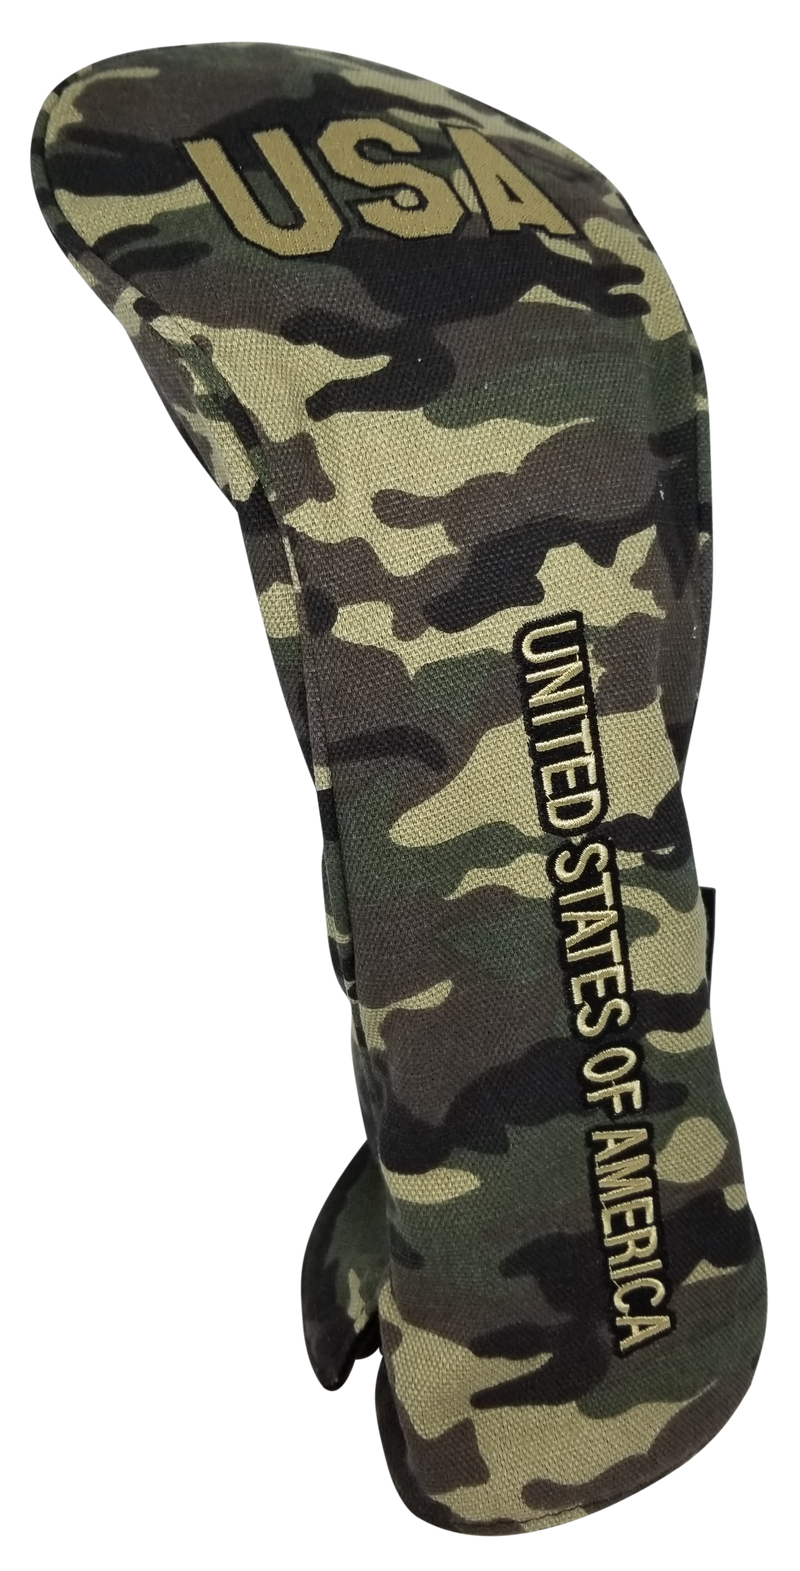 USA Military Camo Embroidered Headcover by ReadyGOLF - Driver